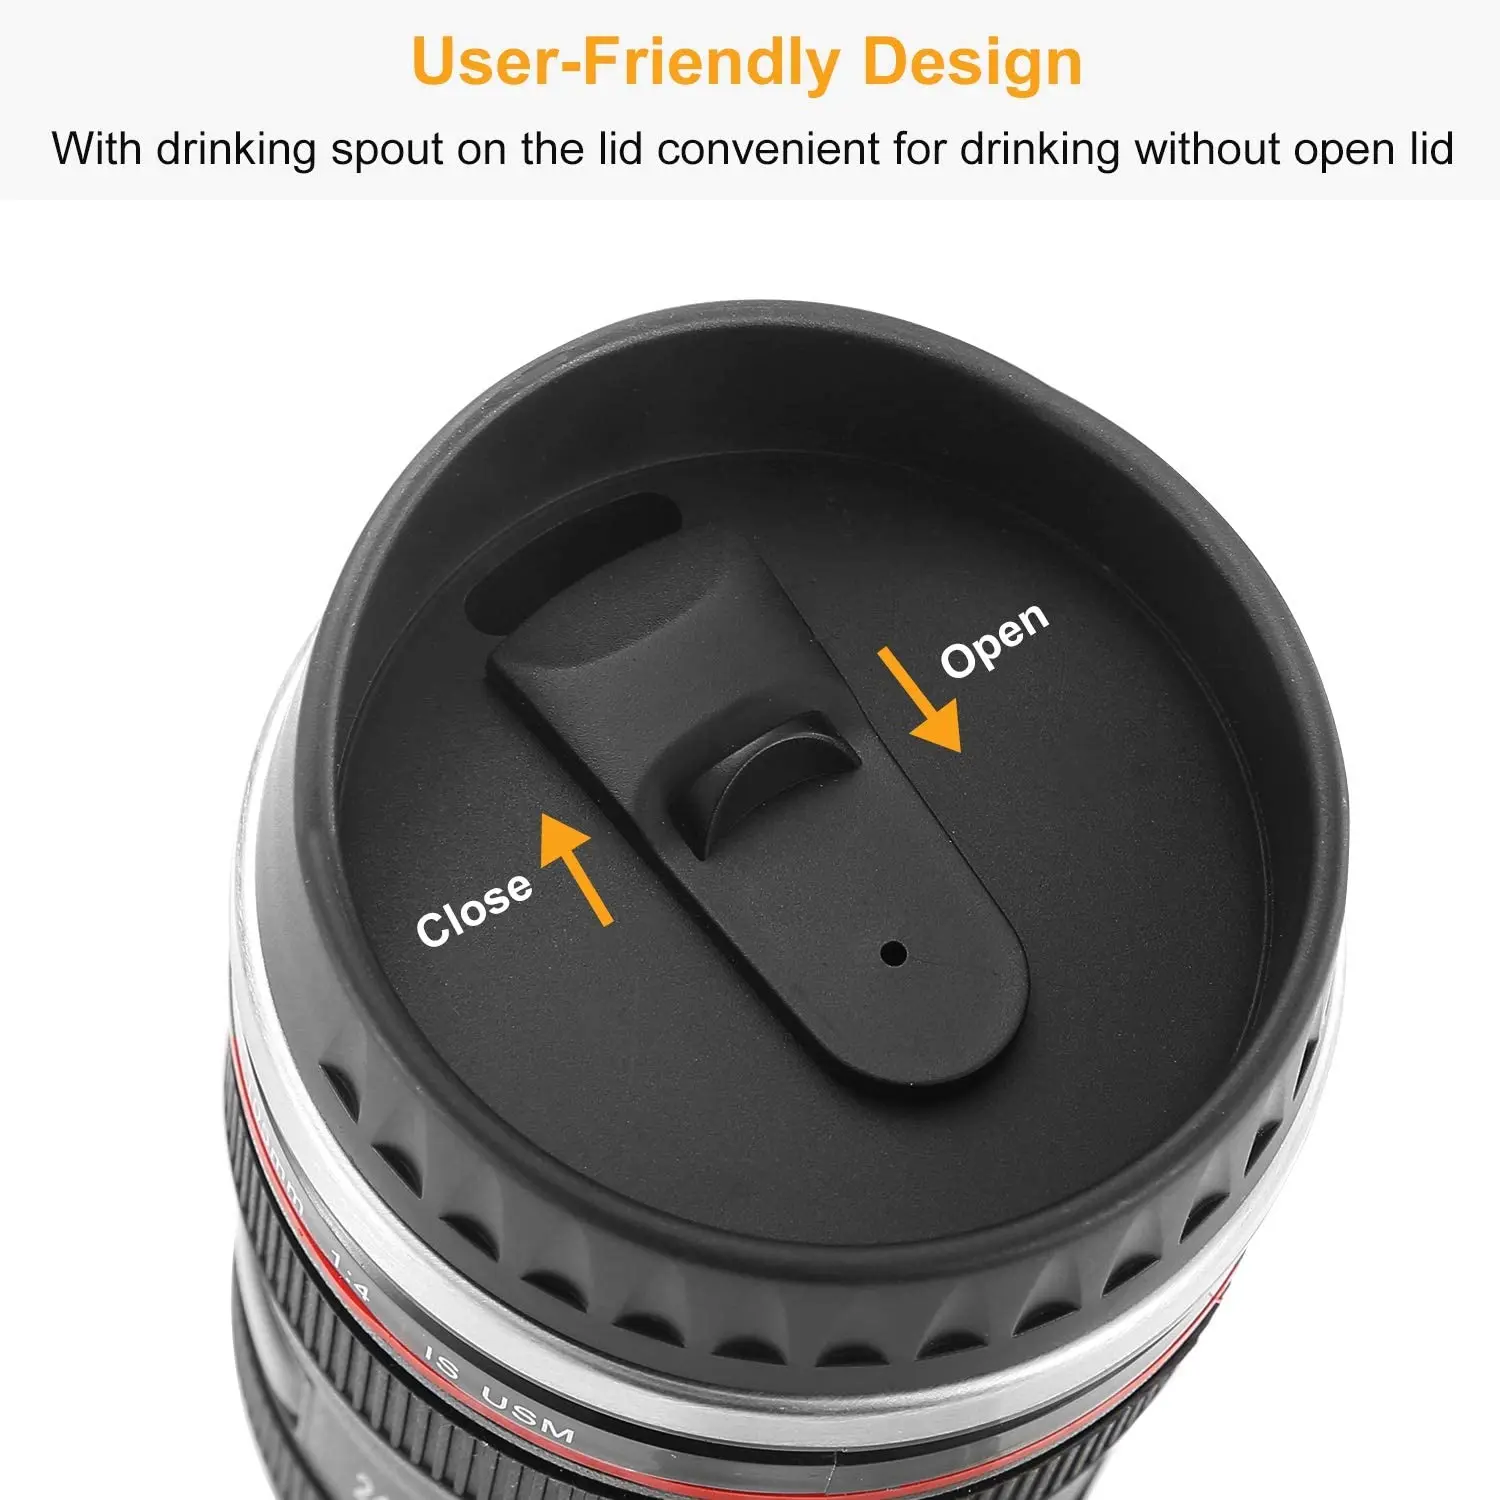 Fancy Free Sample 14oz Stainless Steel Travel Thermos Hot Water Cup Slr Camera Lens Coffee Cup Mug